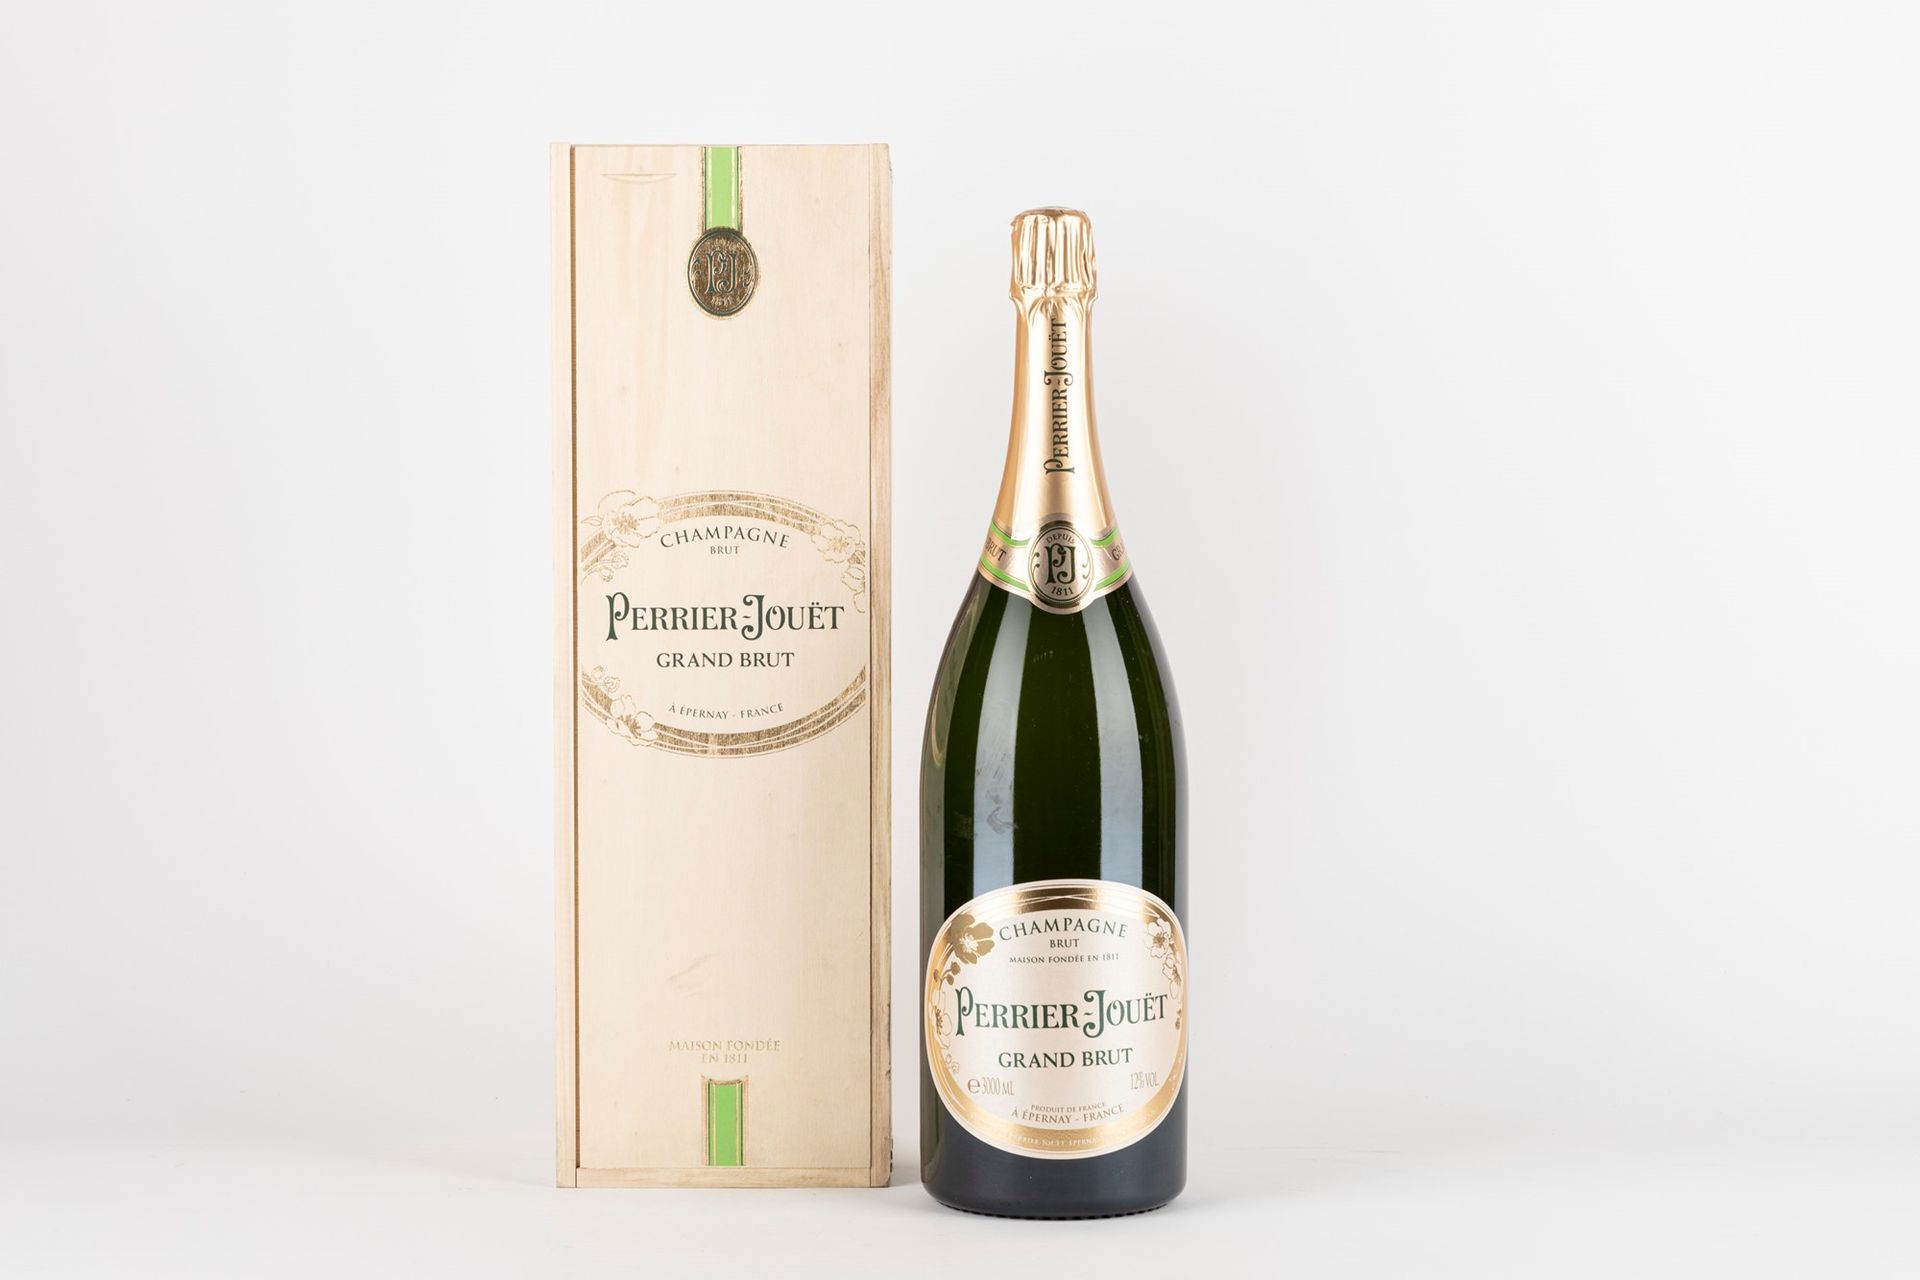 Null Francia - Champagne / Perrier Jouet Grand Brut 3 Litri 

1 Jeroboam
OWC